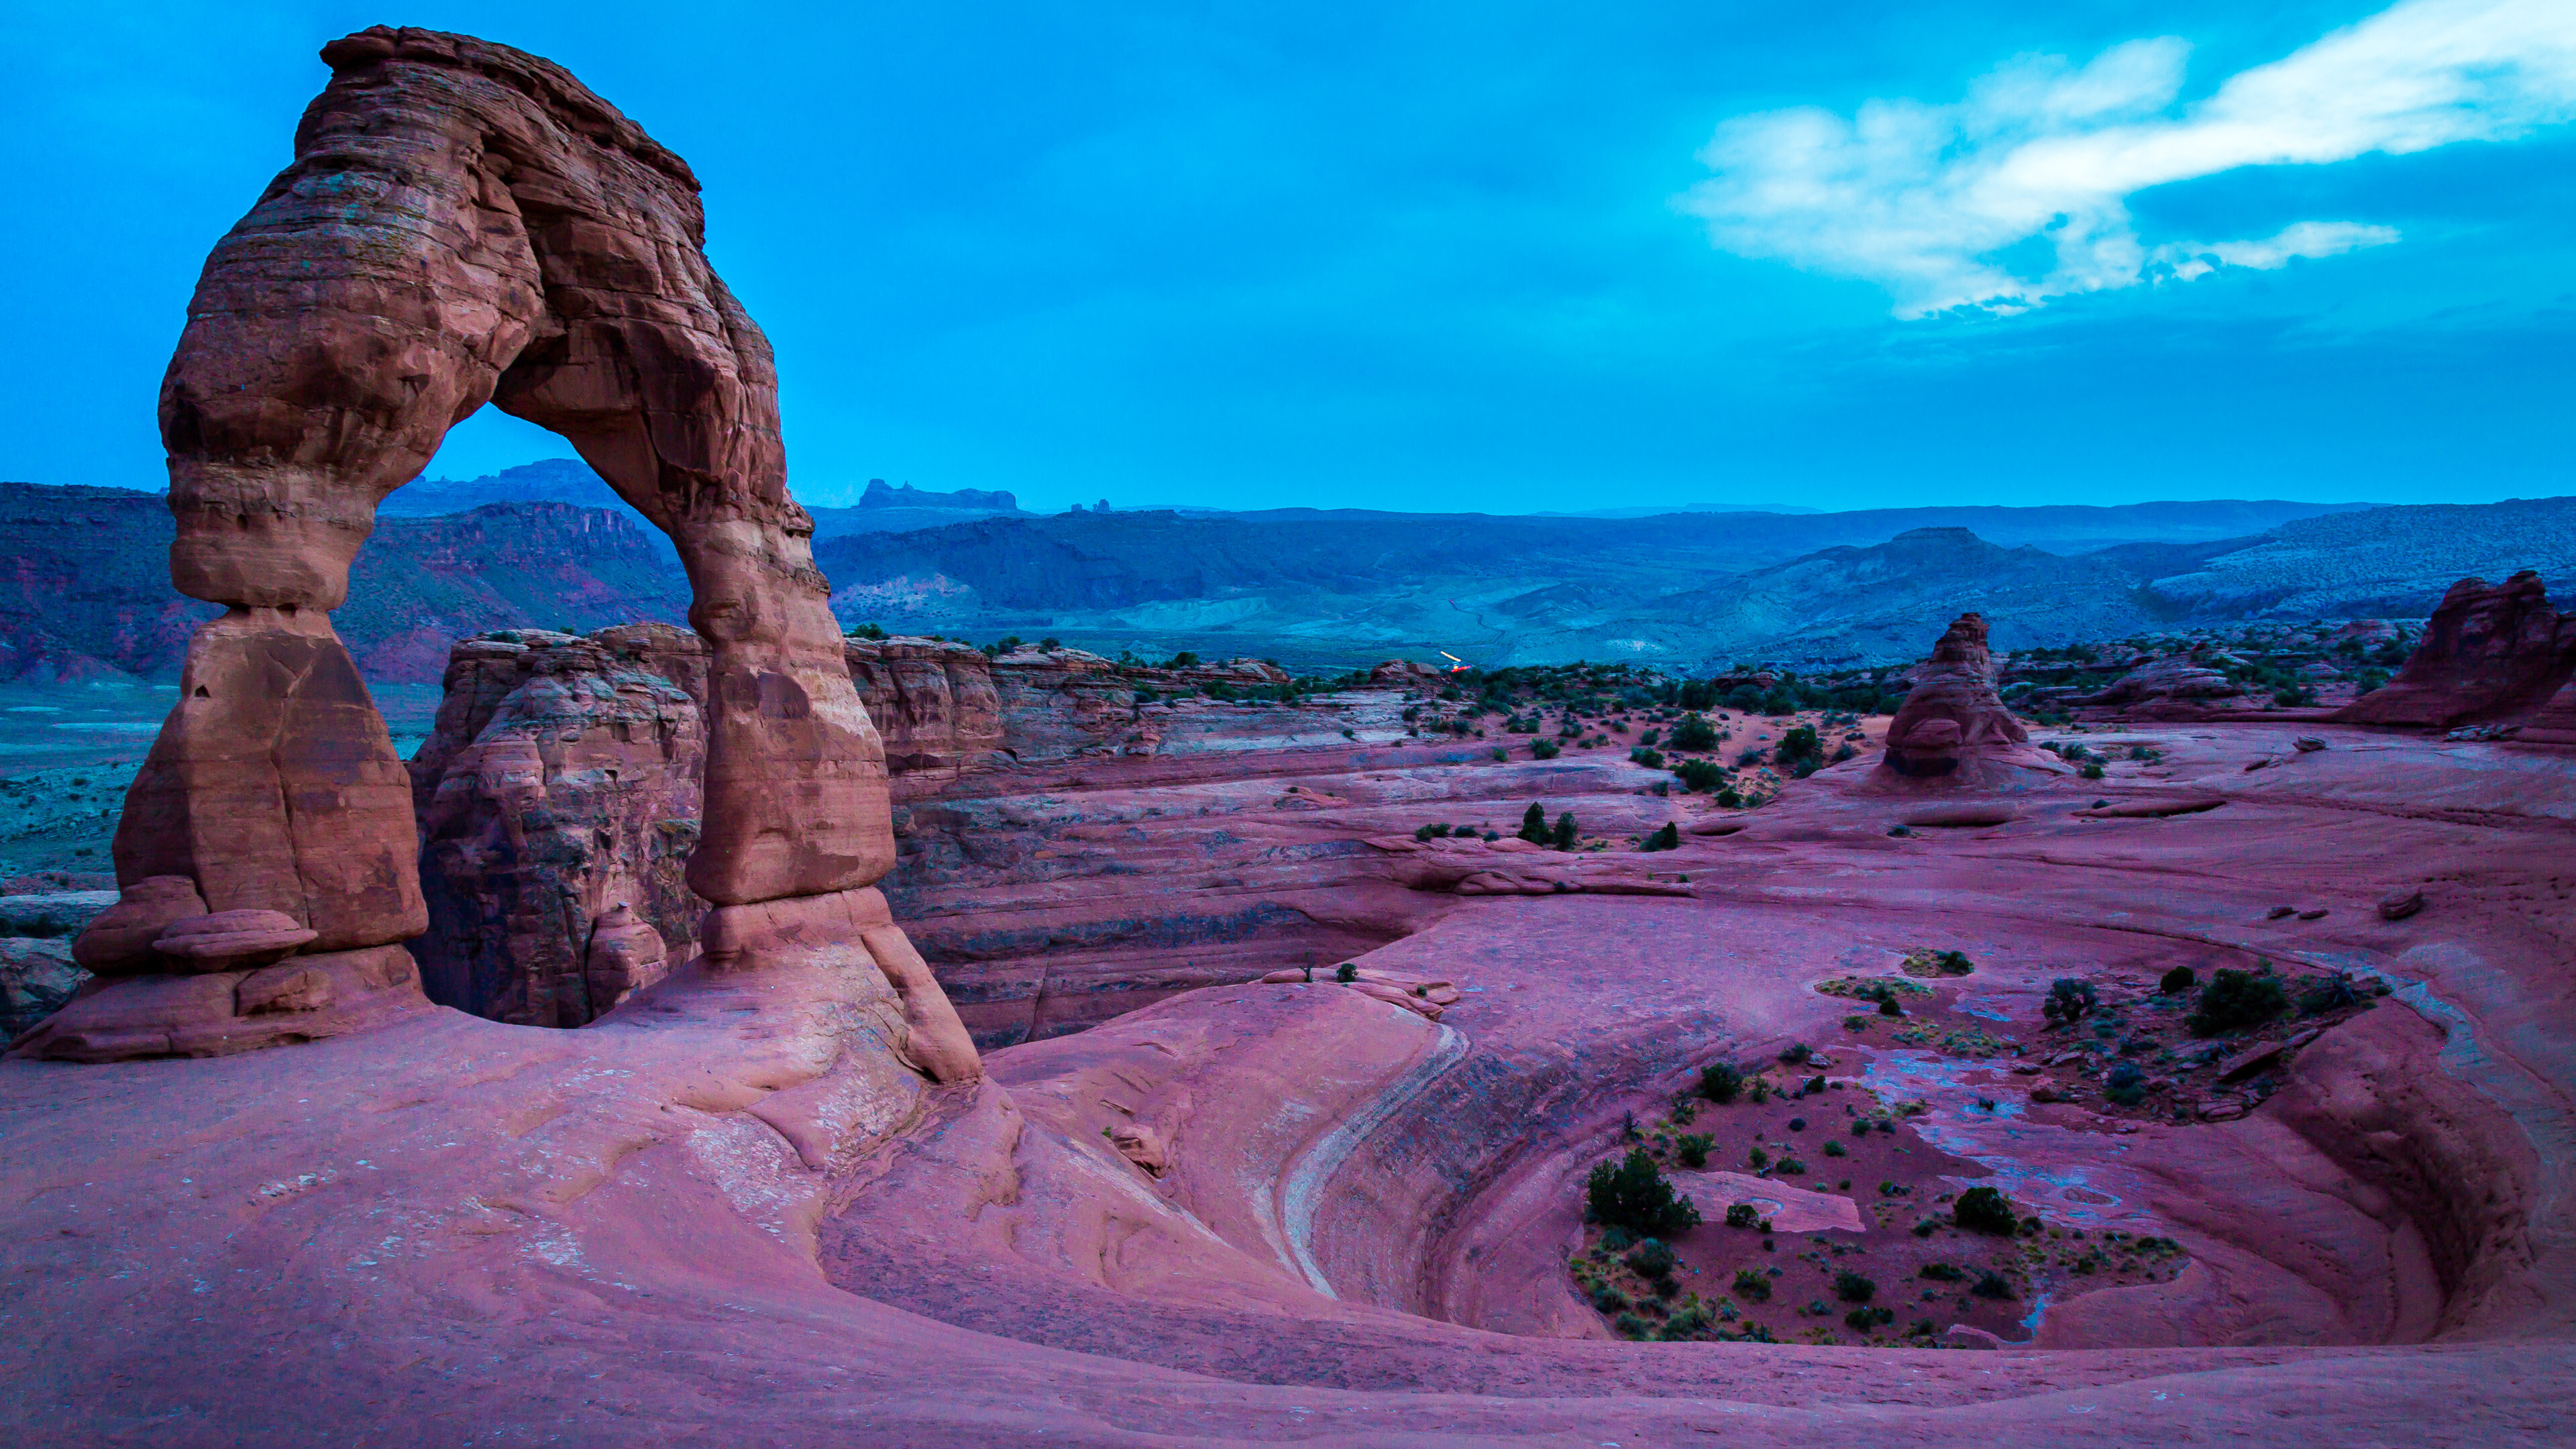 Geology: Arches National Park, Delicate Arch, La Sal Mountains, Scenery. 3840x2160 4K Wallpaper.